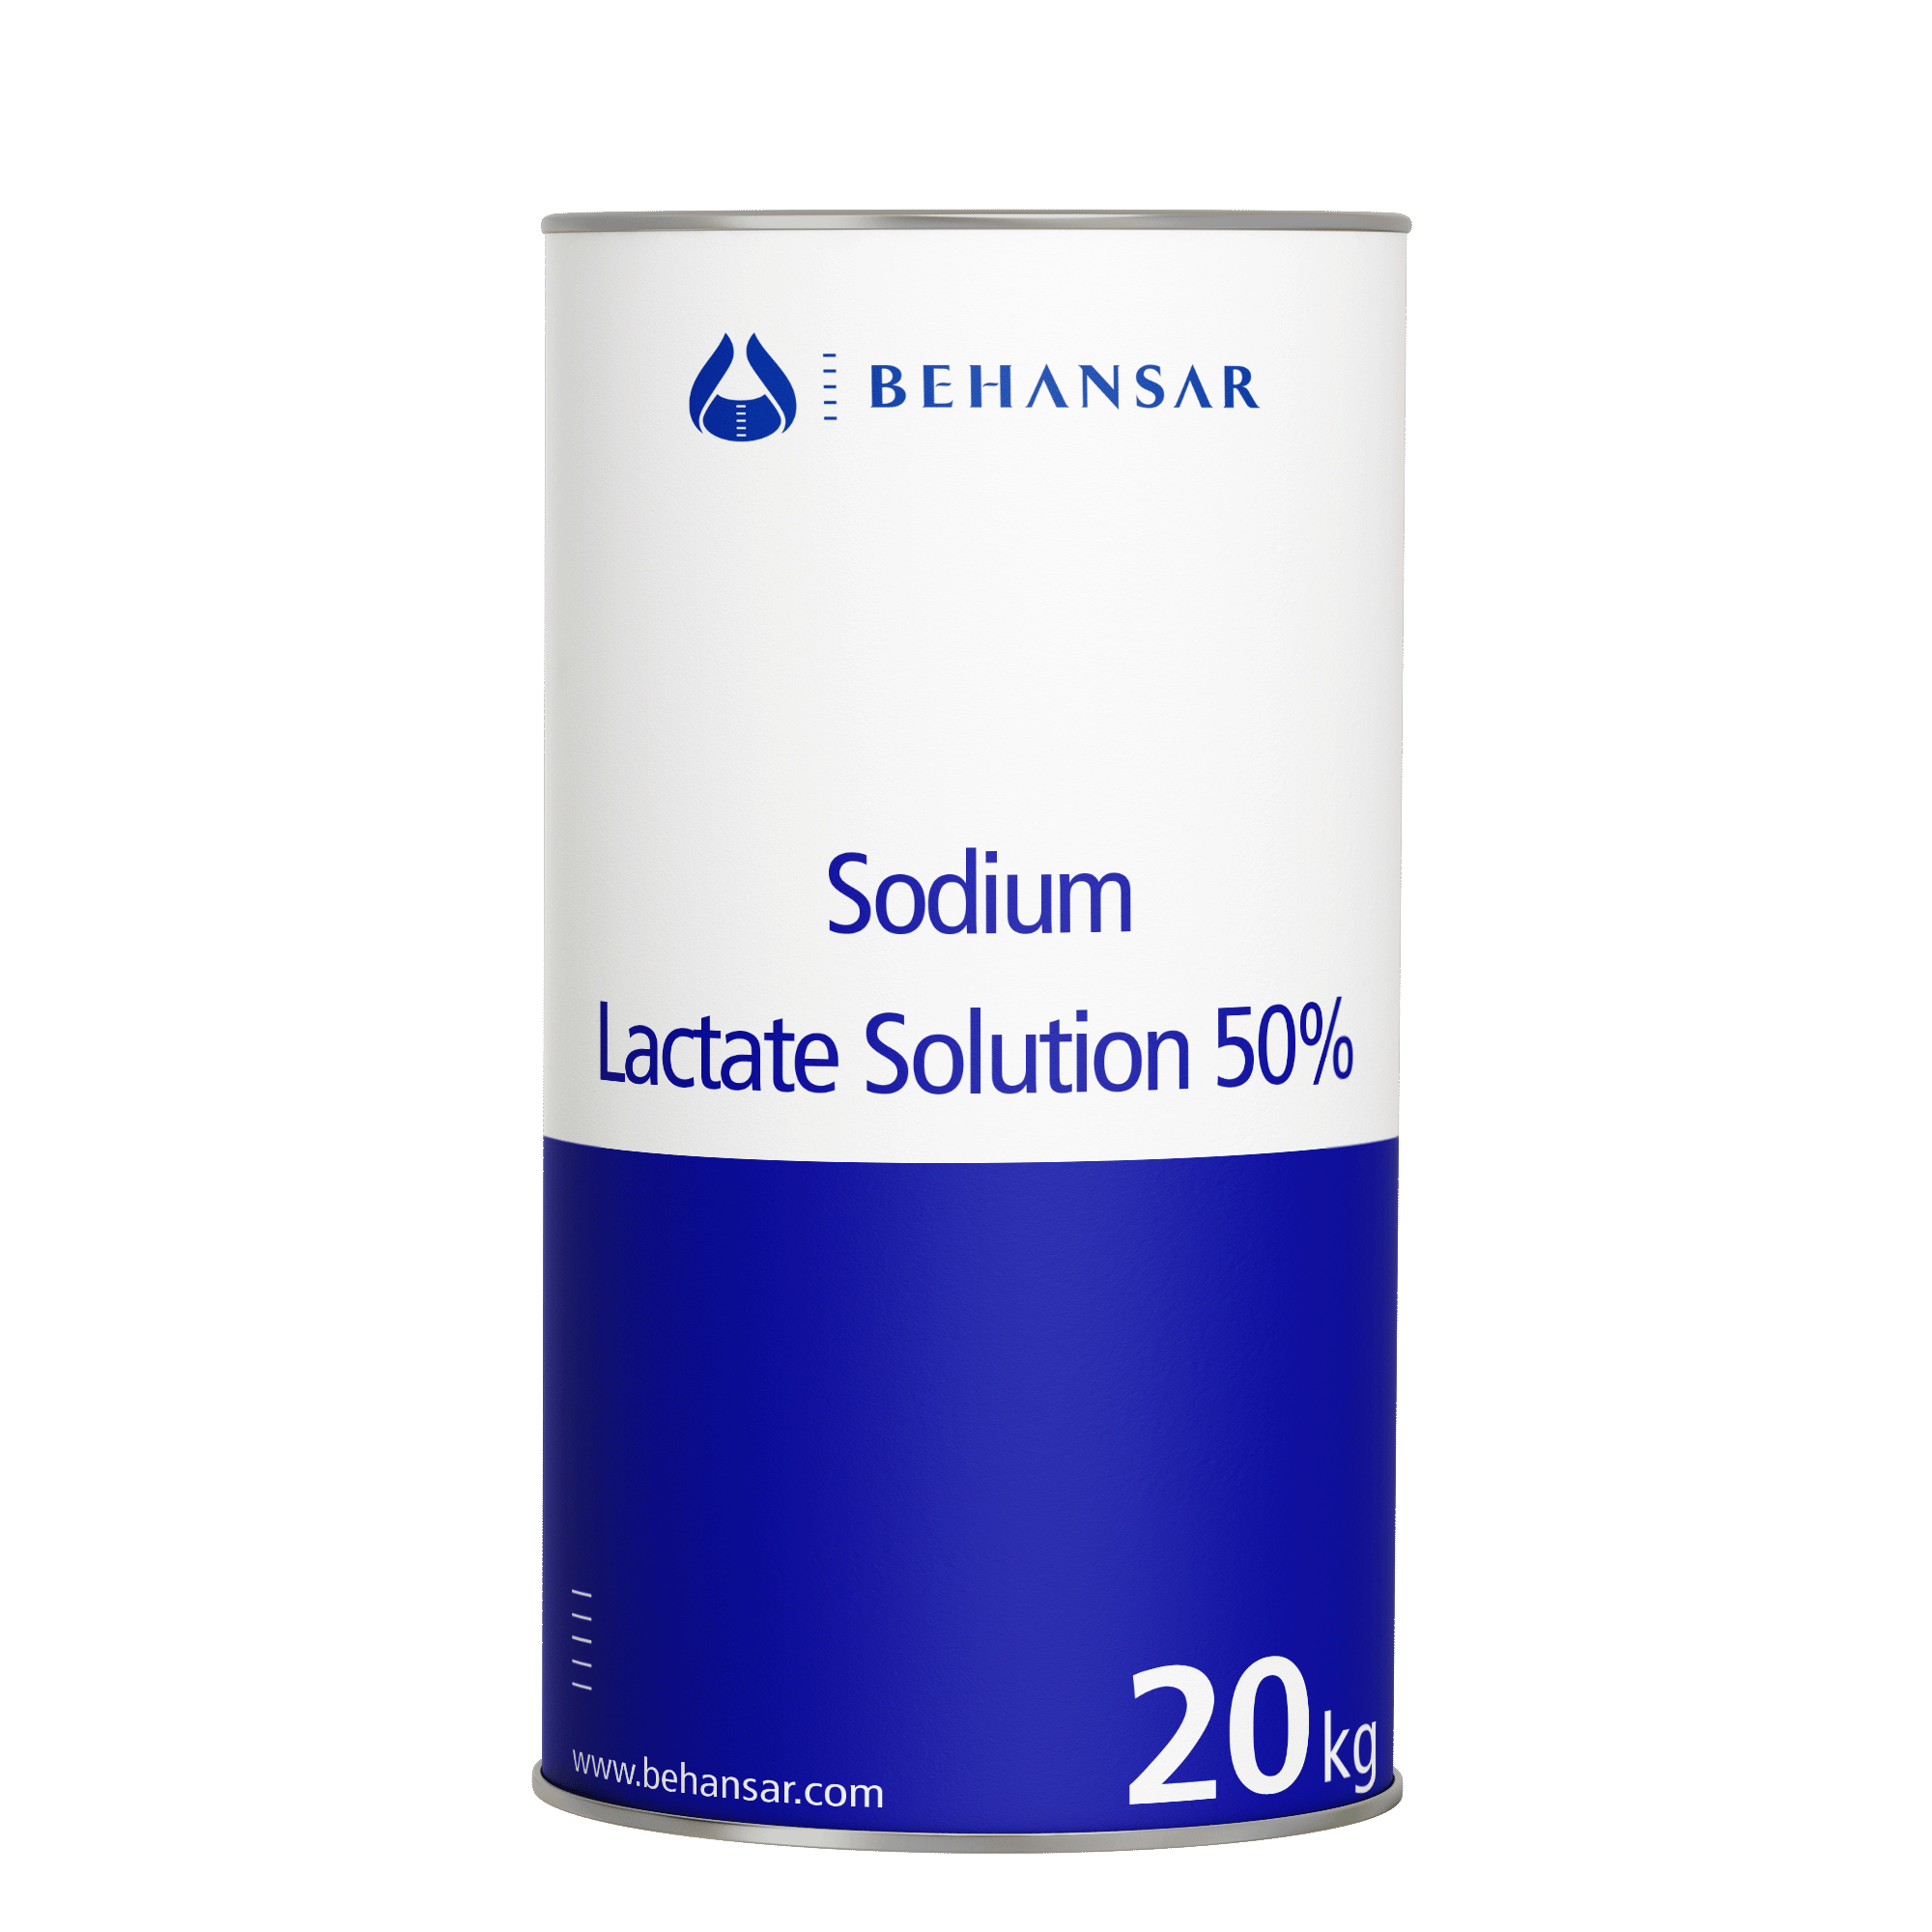 Sodium Lactate Solution 50% is one of the products of Behansar Co